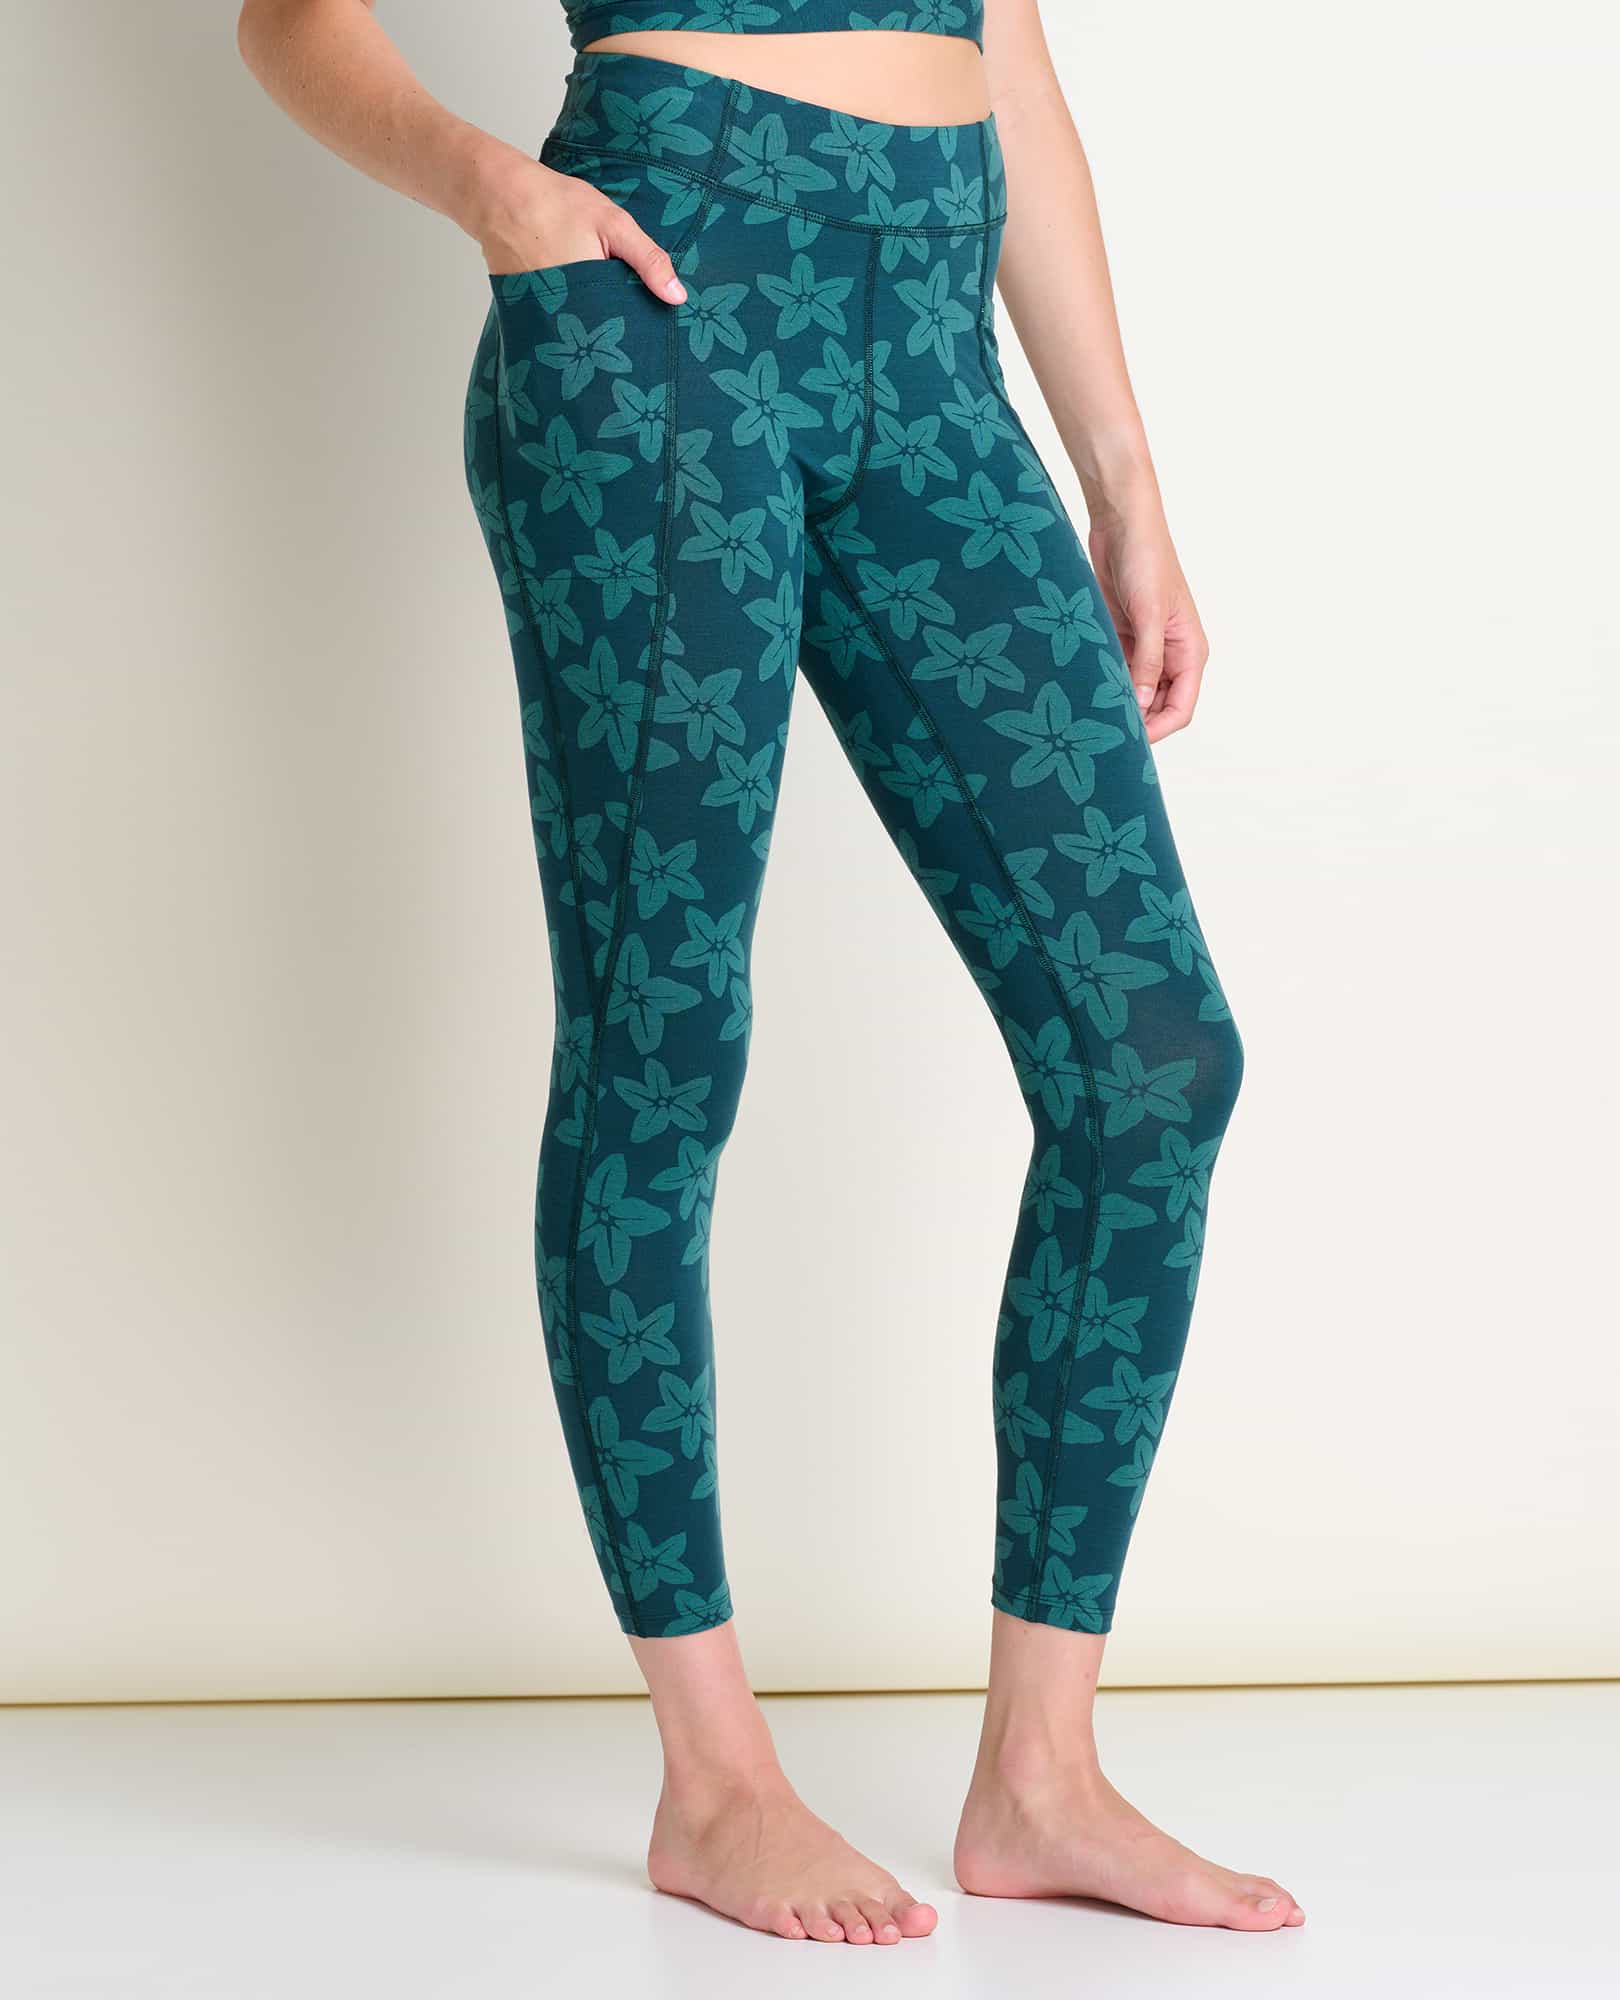 LuLaRoe girls leggings $18 lots of prints and colors. Join the